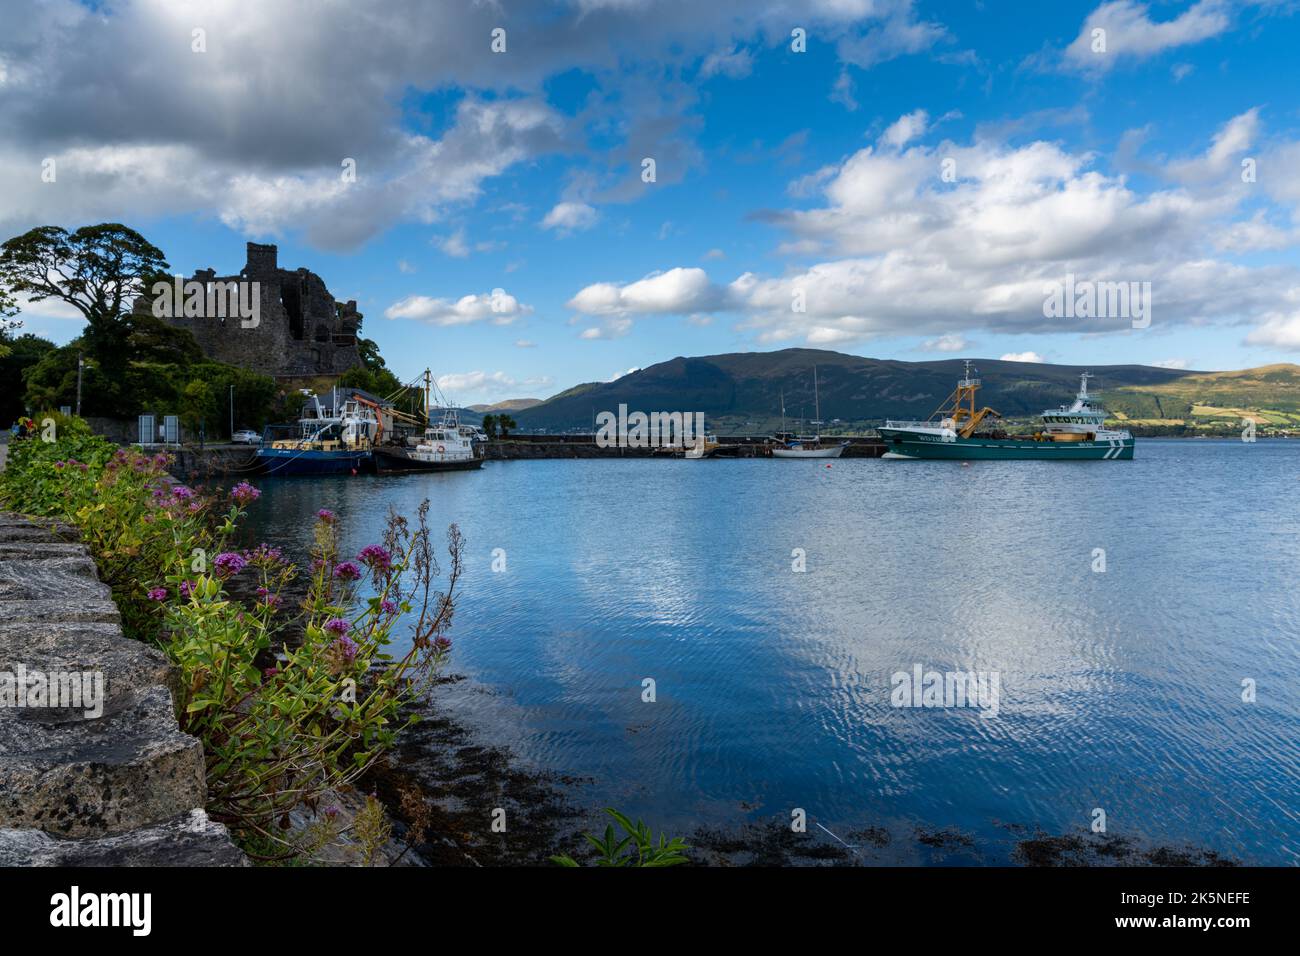 Carlingford, Ireland - 21 August, 2022: view of the harbor of and castle of Carlingford on the Cooley Peninsula Stock Photo